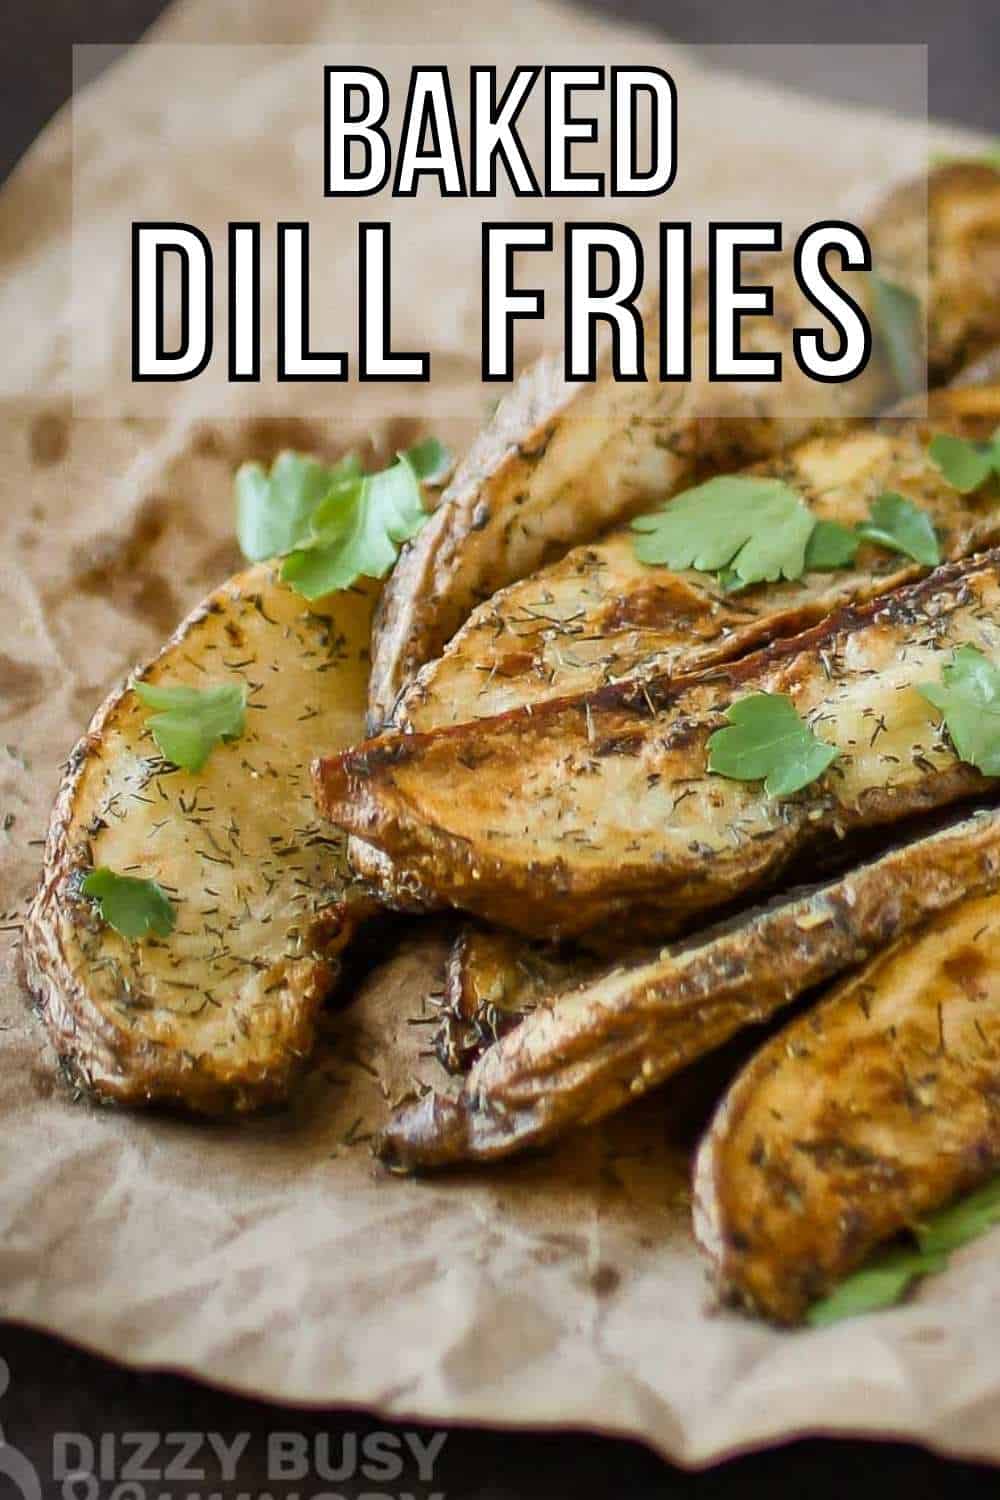 Close up shot of multiple dill French fries garnished with herbs on a brown paper on a black surface.